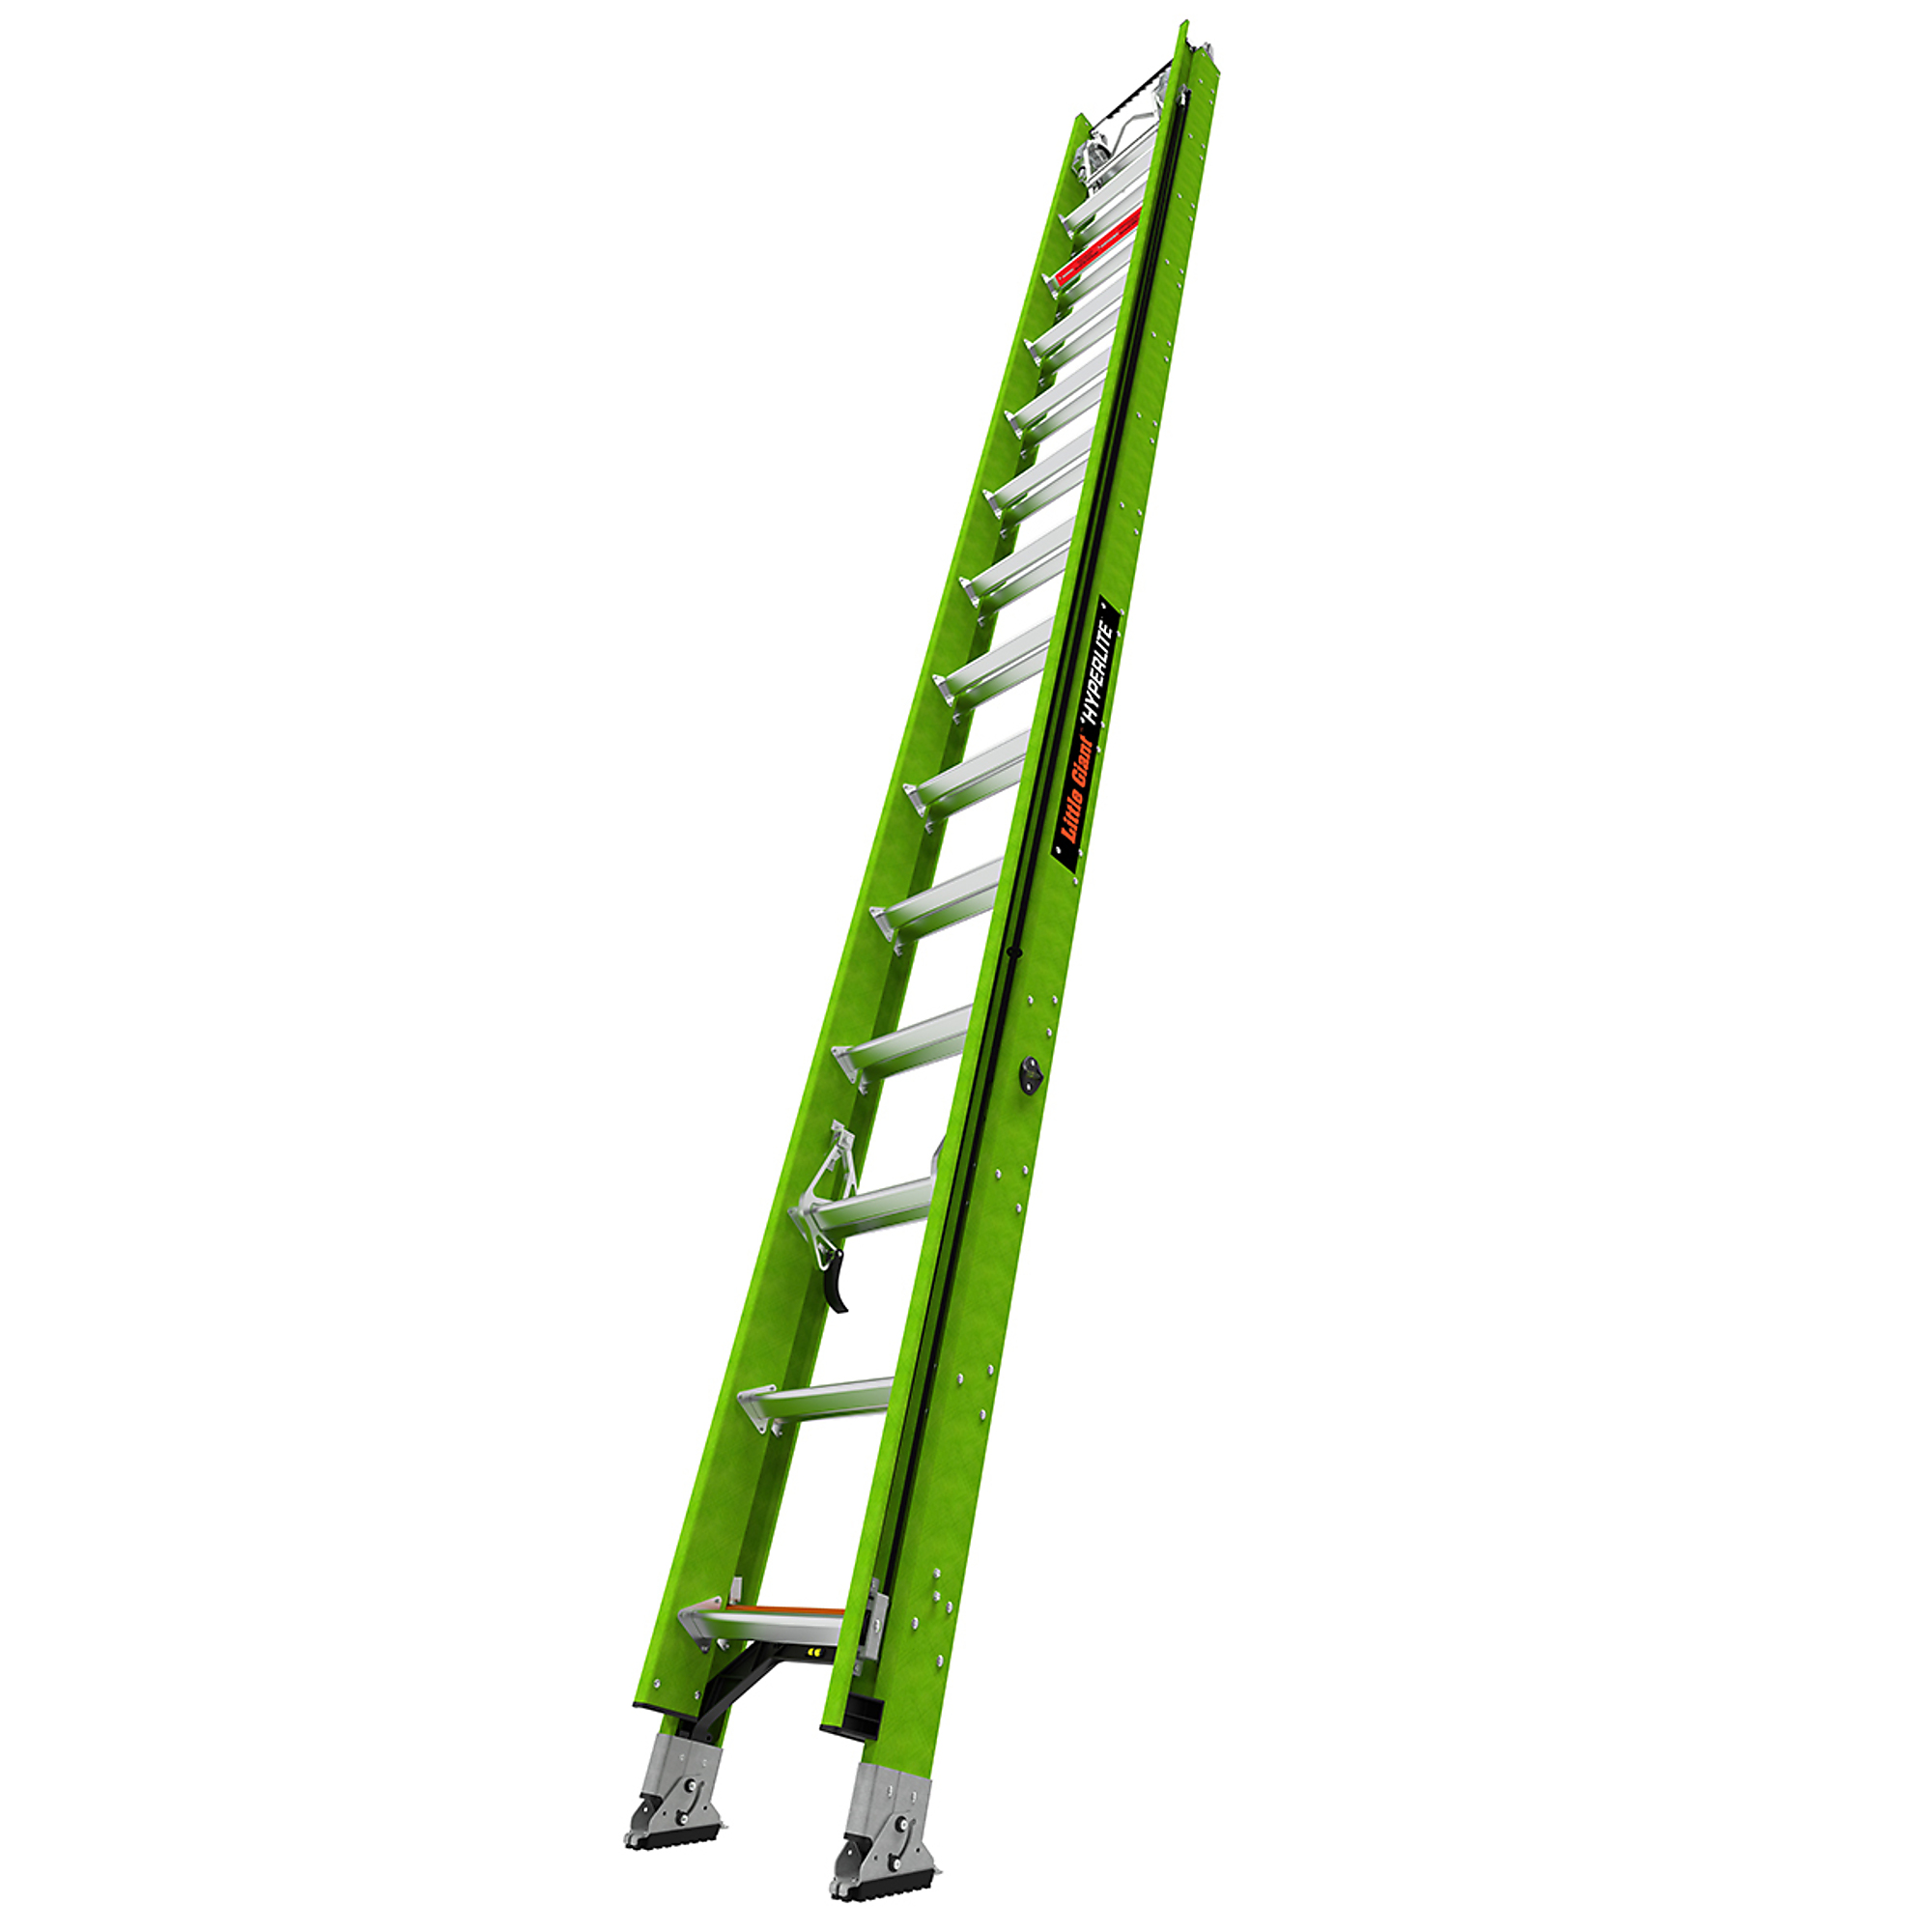 Little Giant Ladder, HYPERLITE 28 Ext Lad GRND CUE Hook CLAW Pole Strap, Height 28 ft, Capacity 375 lb, Material Fiberglass, Model 17528